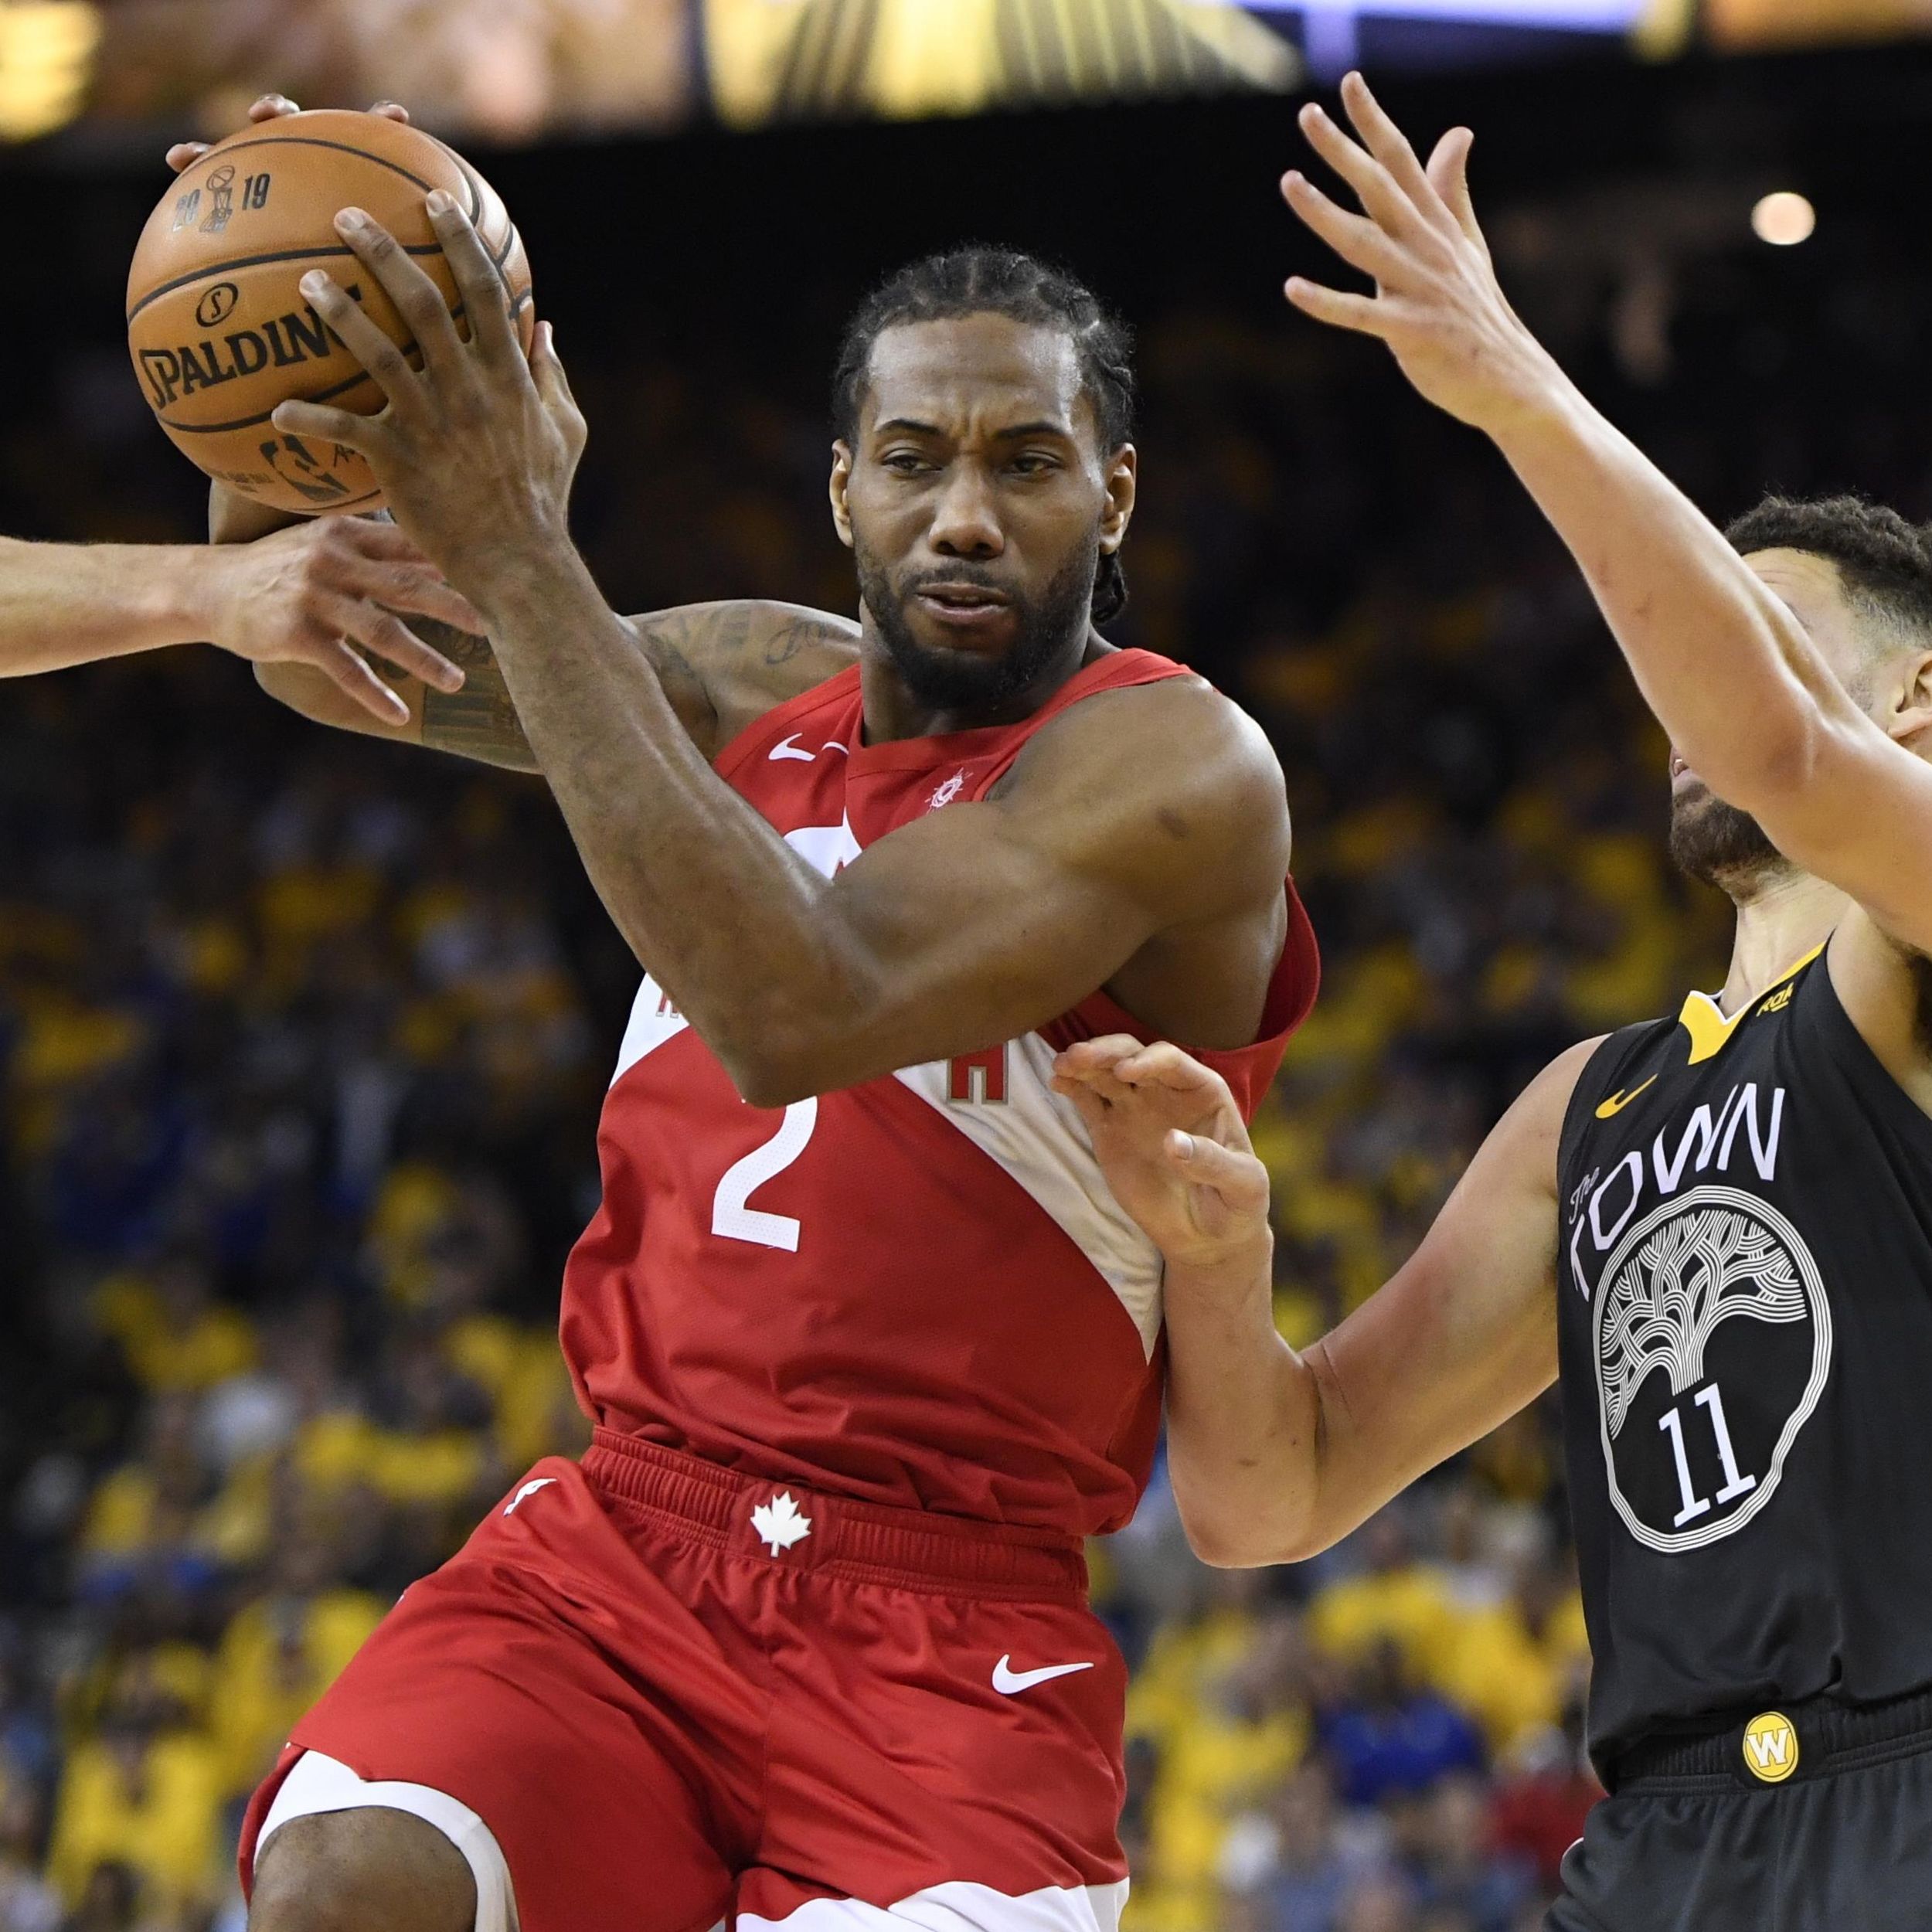 2019 Finals Game 4: Kawhi Leonard delivers 36 points in road